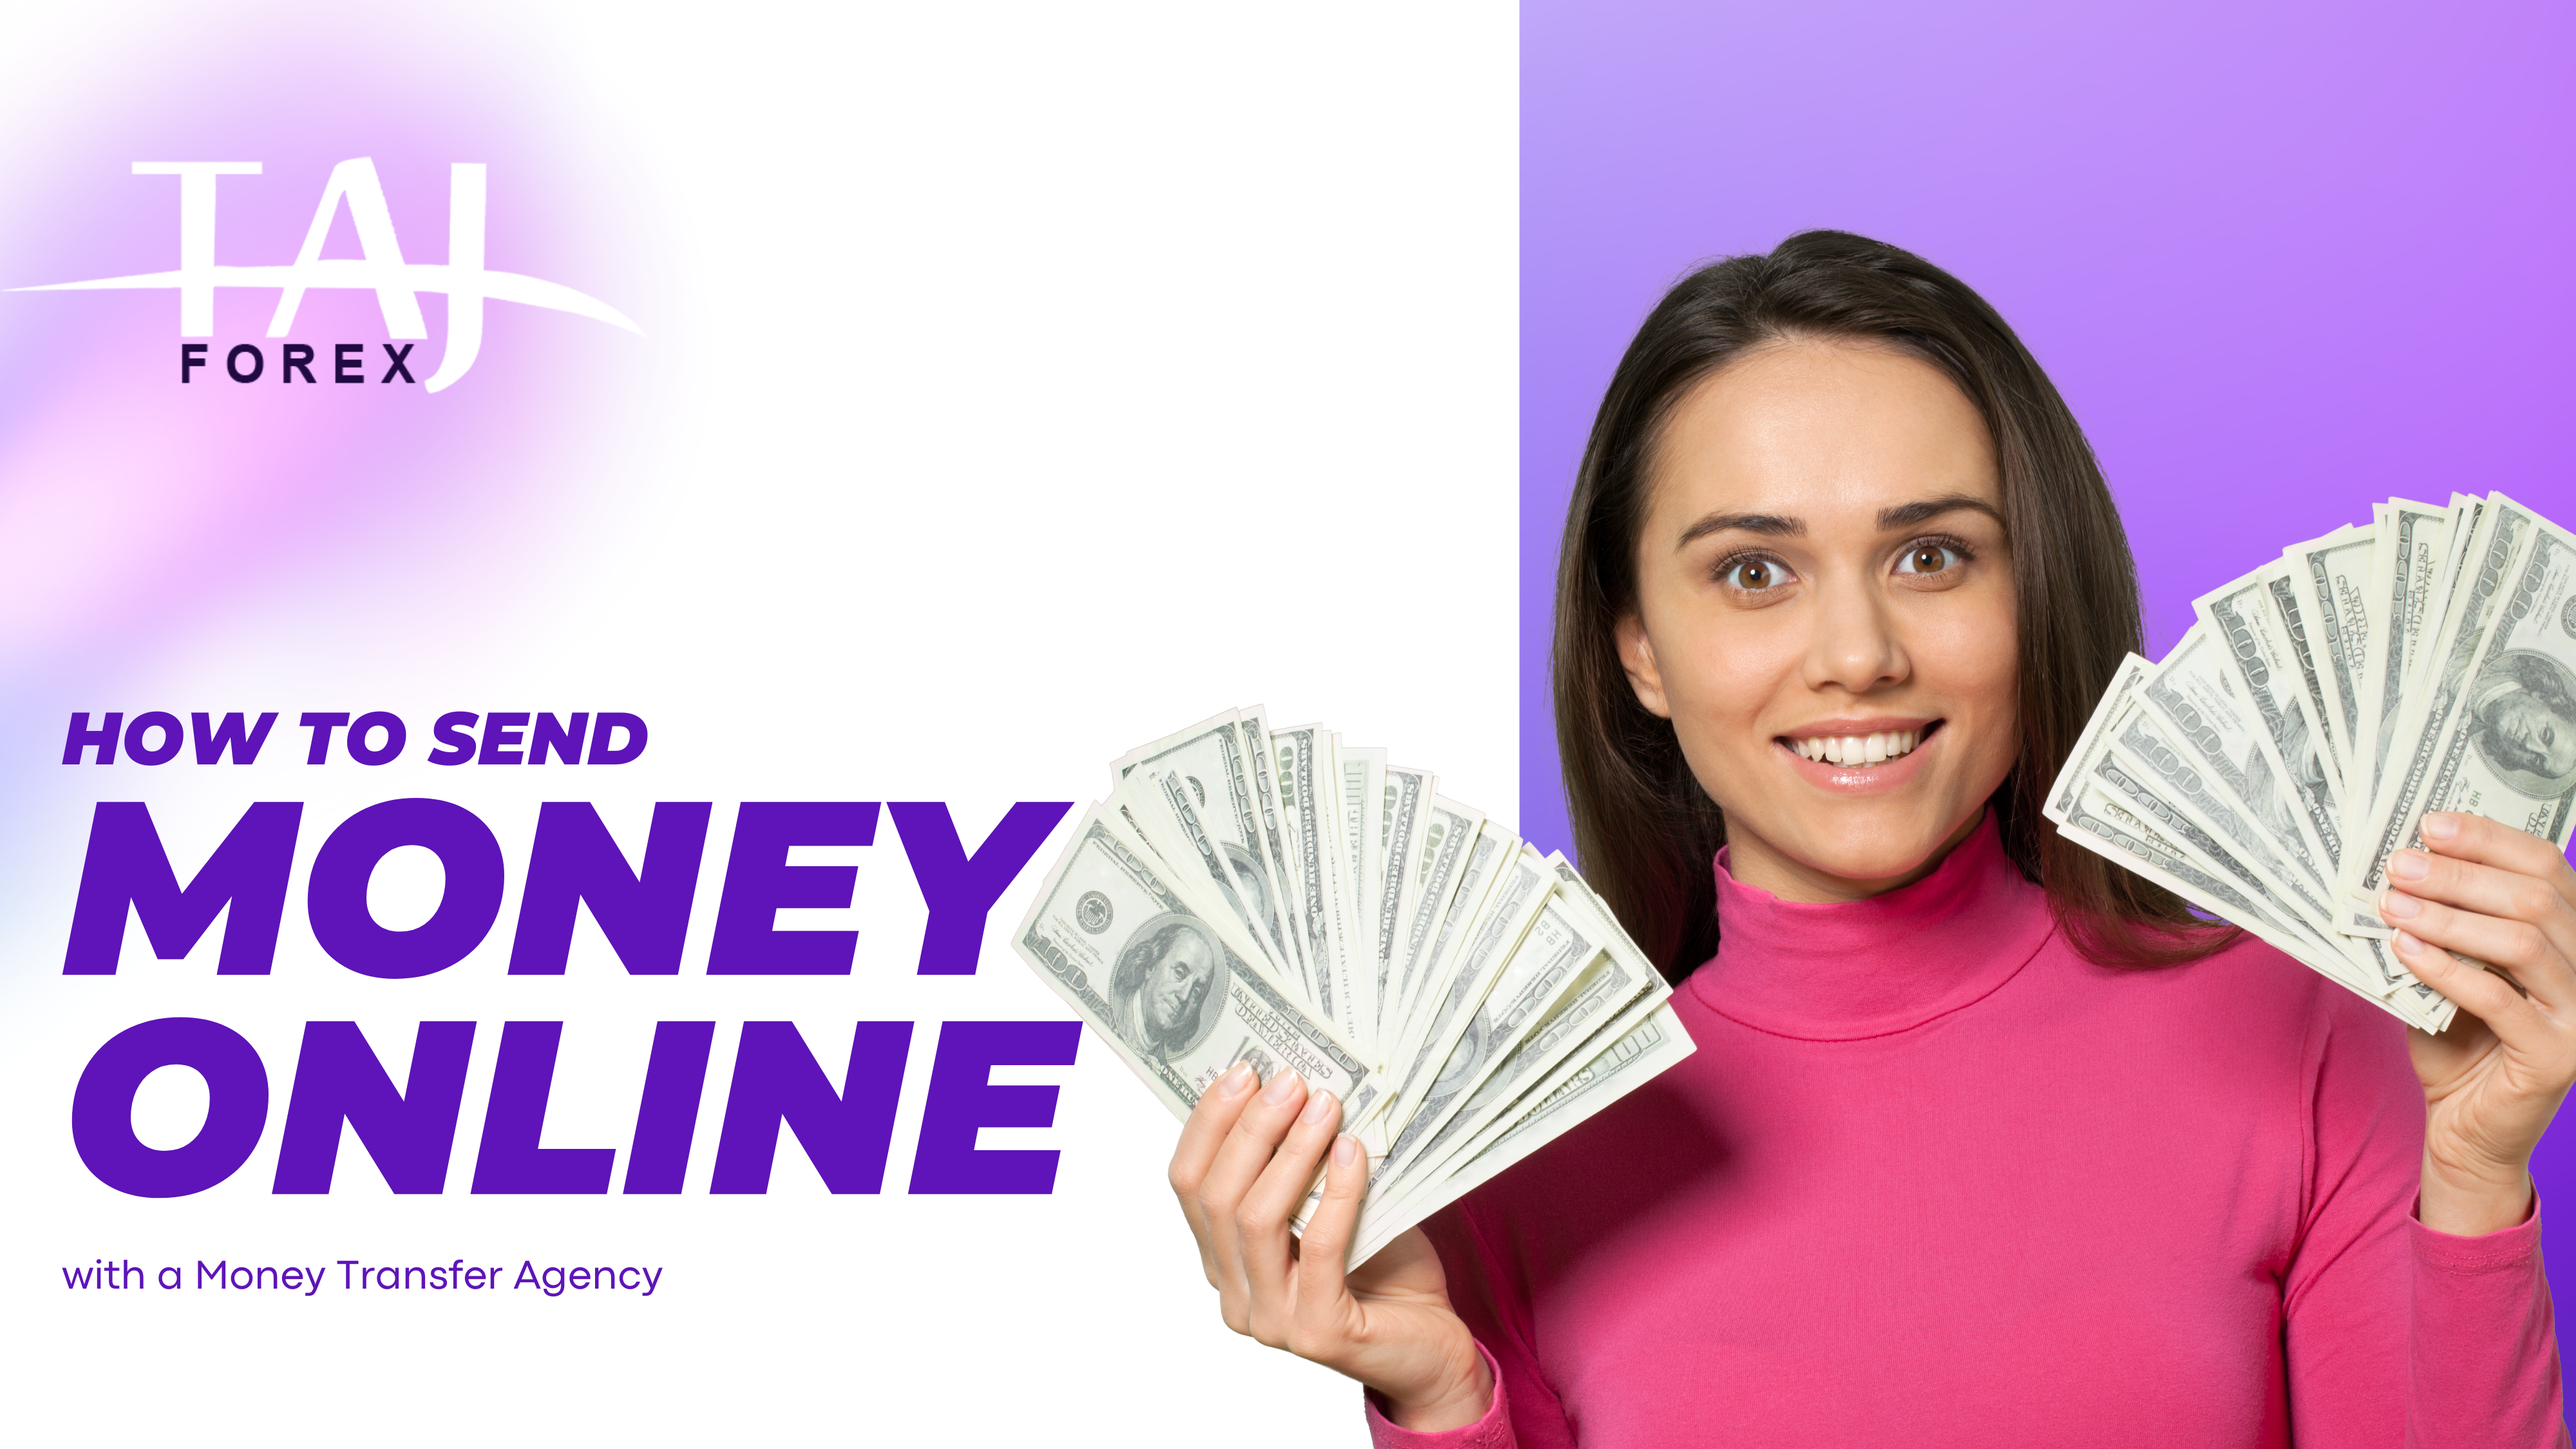 Send-Money-Online-with-a-Money-Transfer-Agency-pic-feature